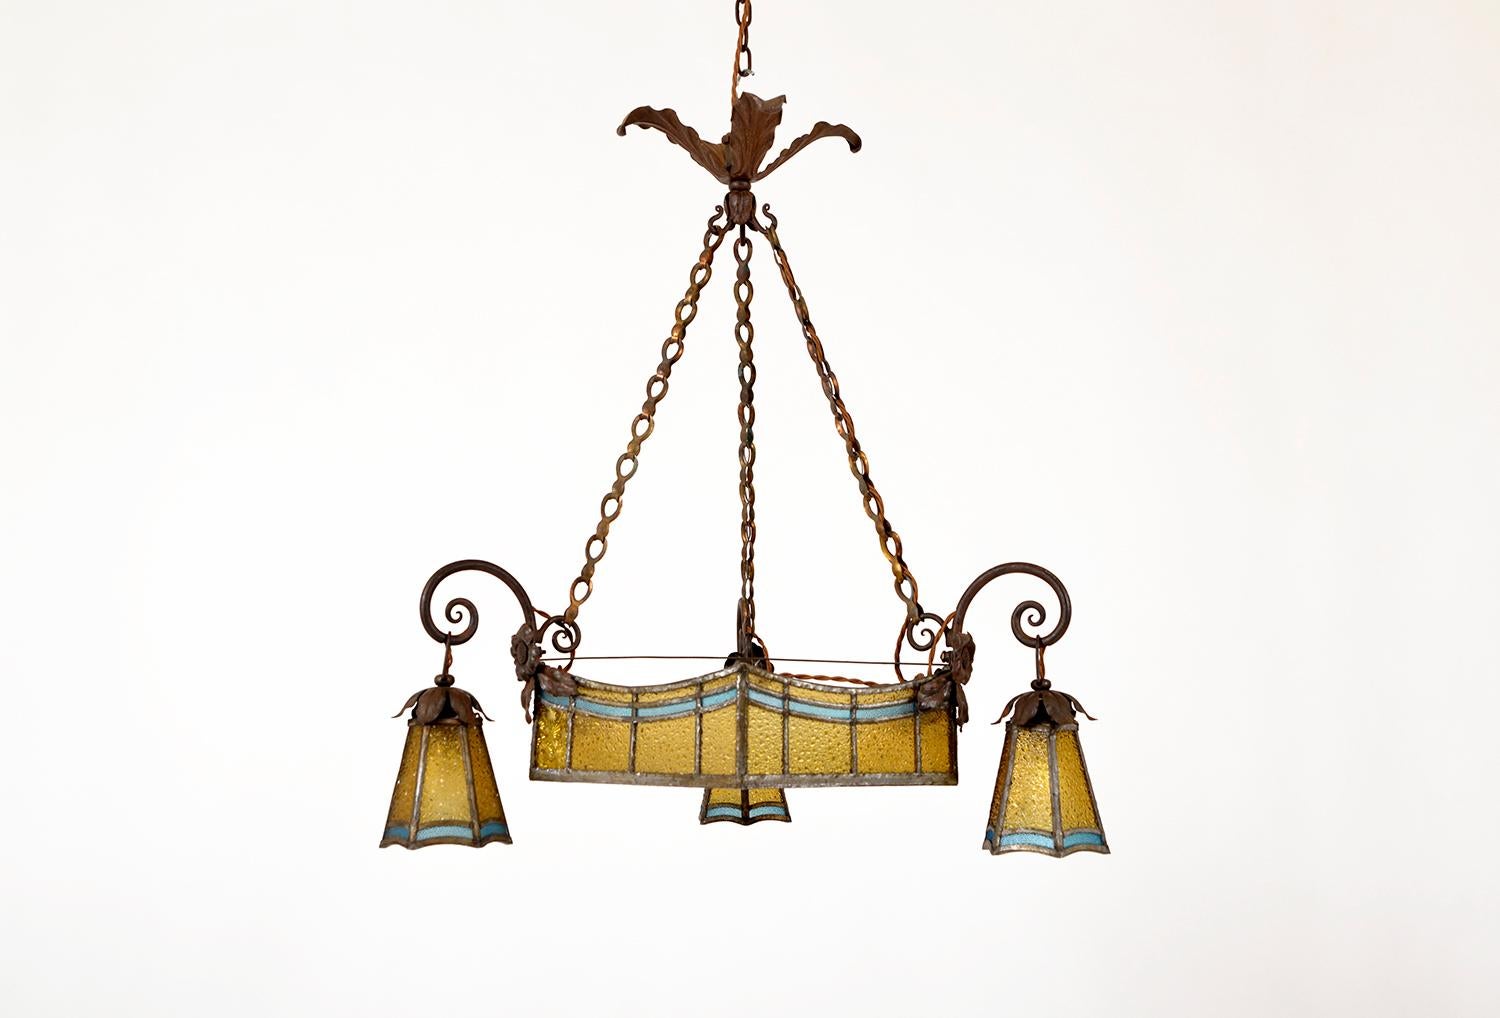 This stunning and very elegant leaded glass pendant light dating from the early 20th century looks like it has come straight out of a Parisian café.
The piece has been lavished with the most intricate of forged ironwork; hung from an ornate acanthus